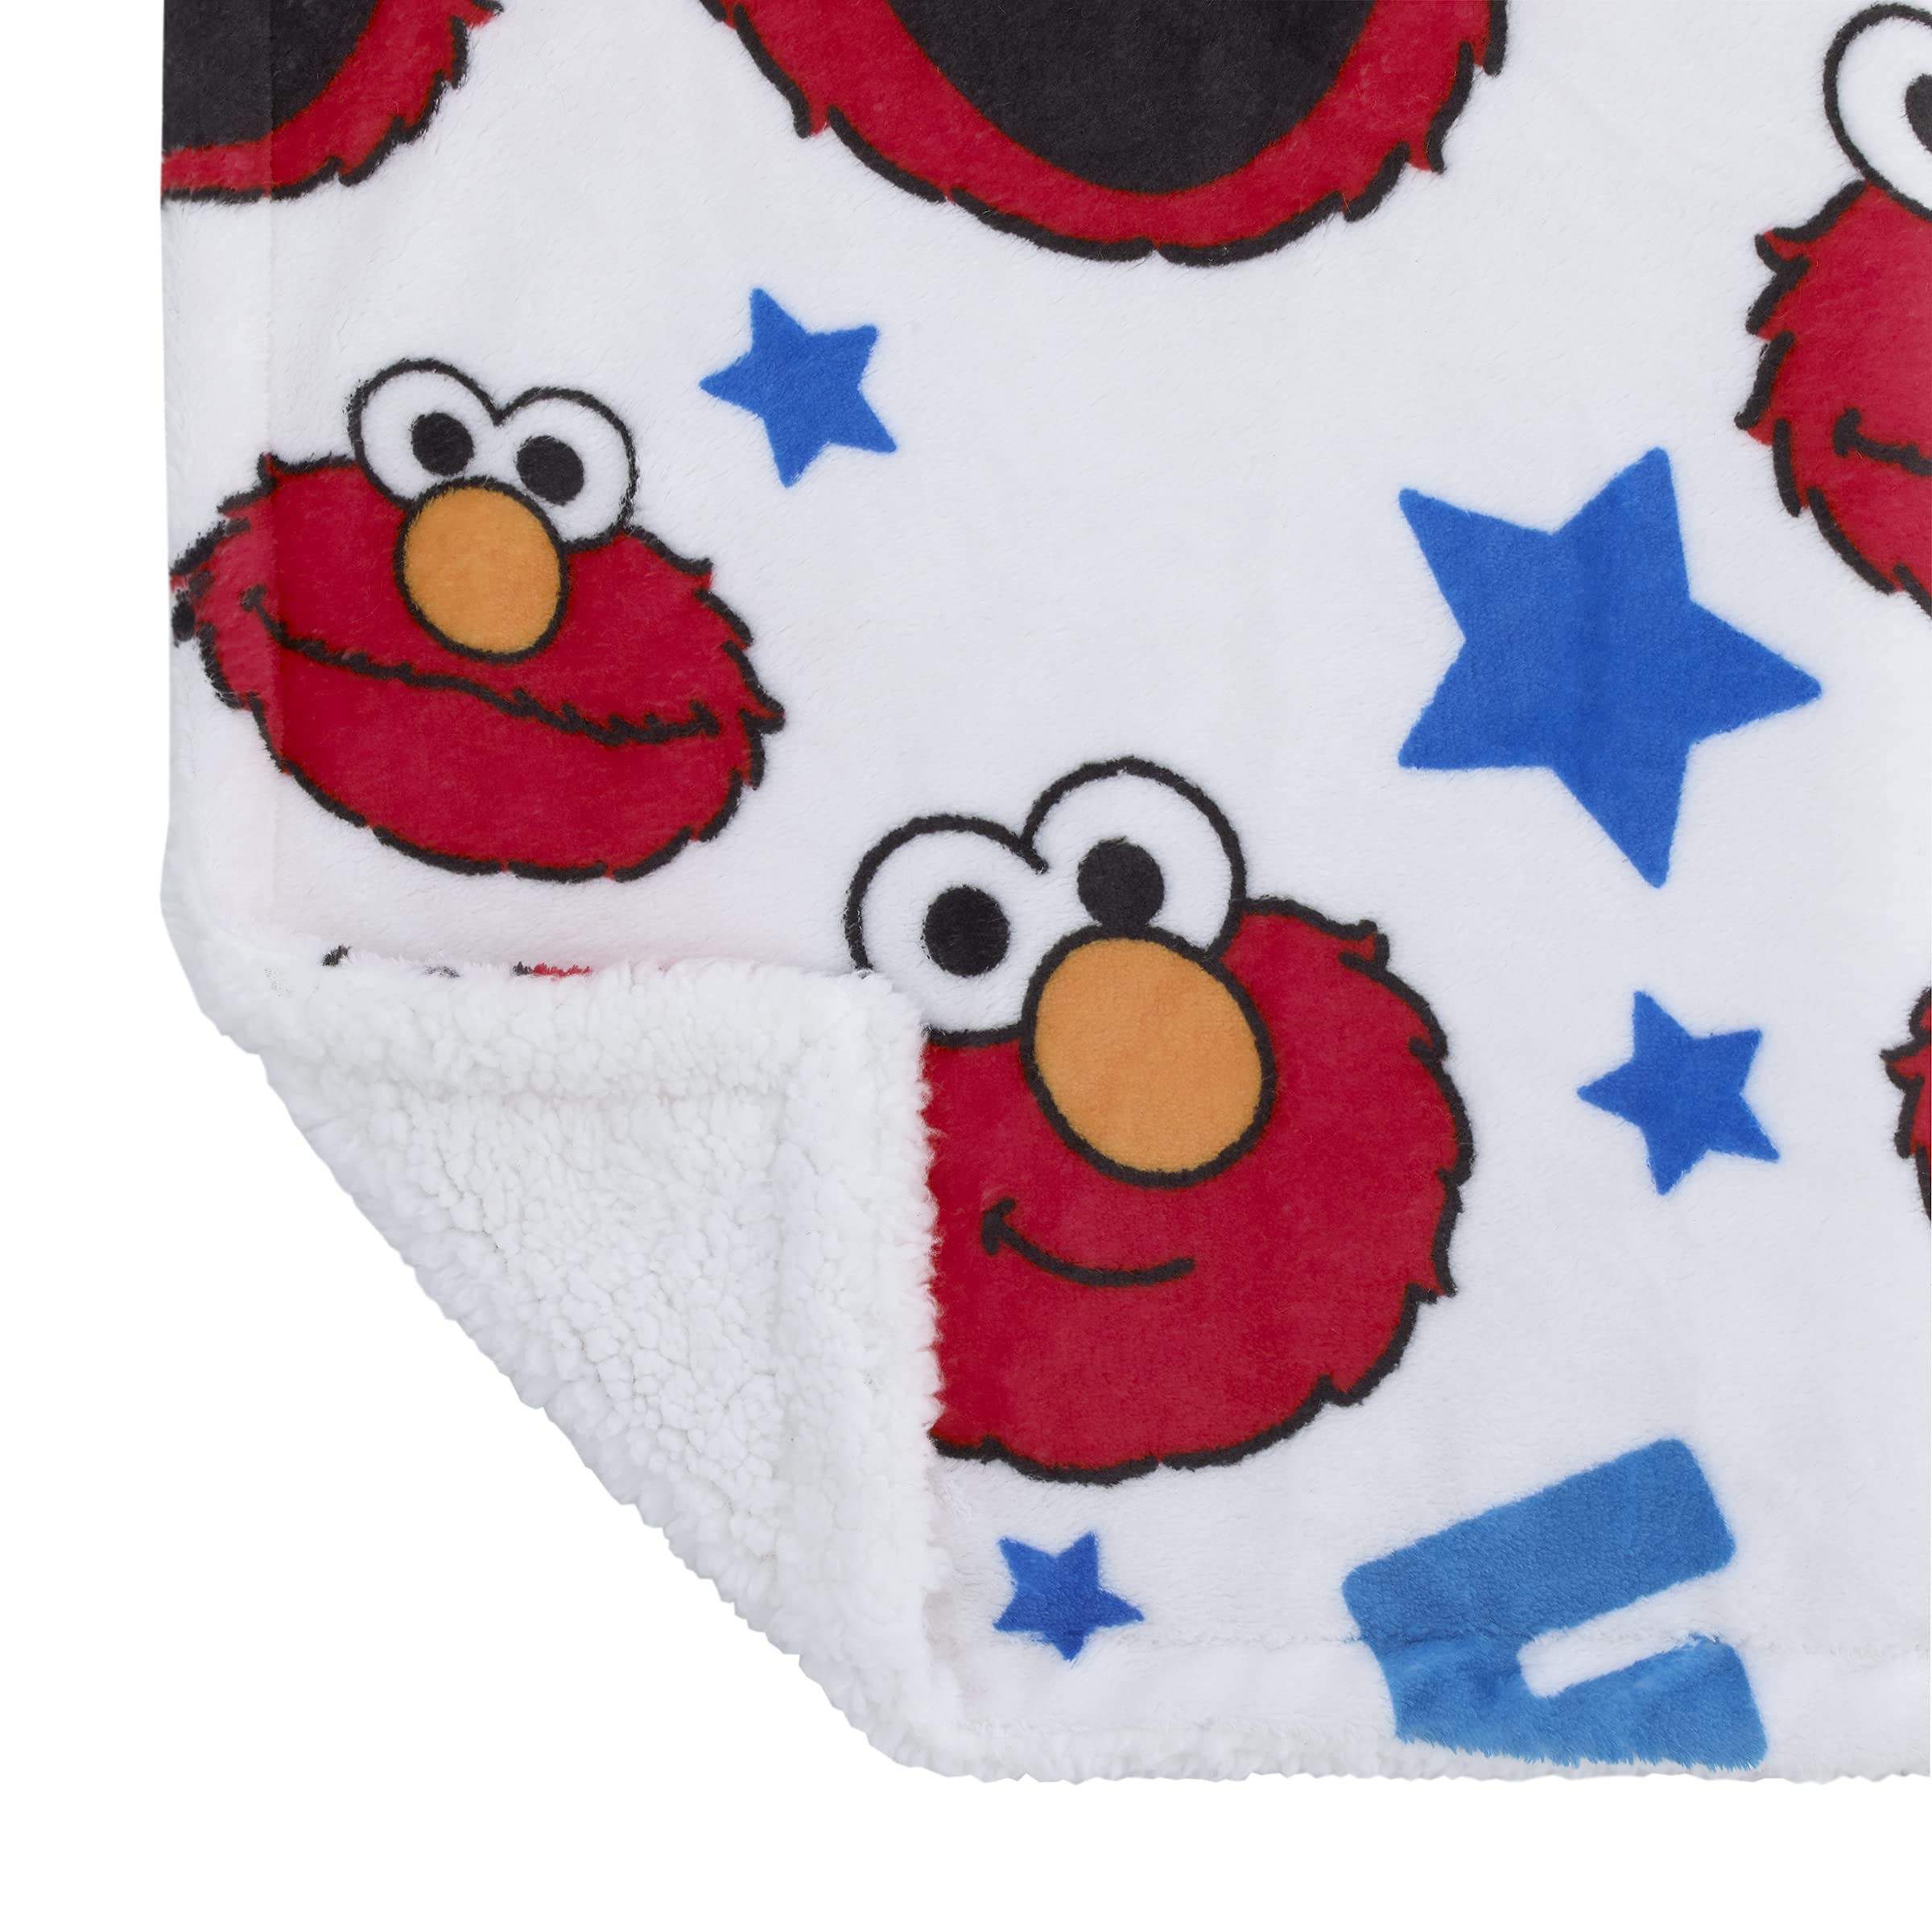 Sesame Street Elmo, Red, Blue, Yellow, Green, & White with Stars Super Soft Baby Blanket, Red, Blue, White,